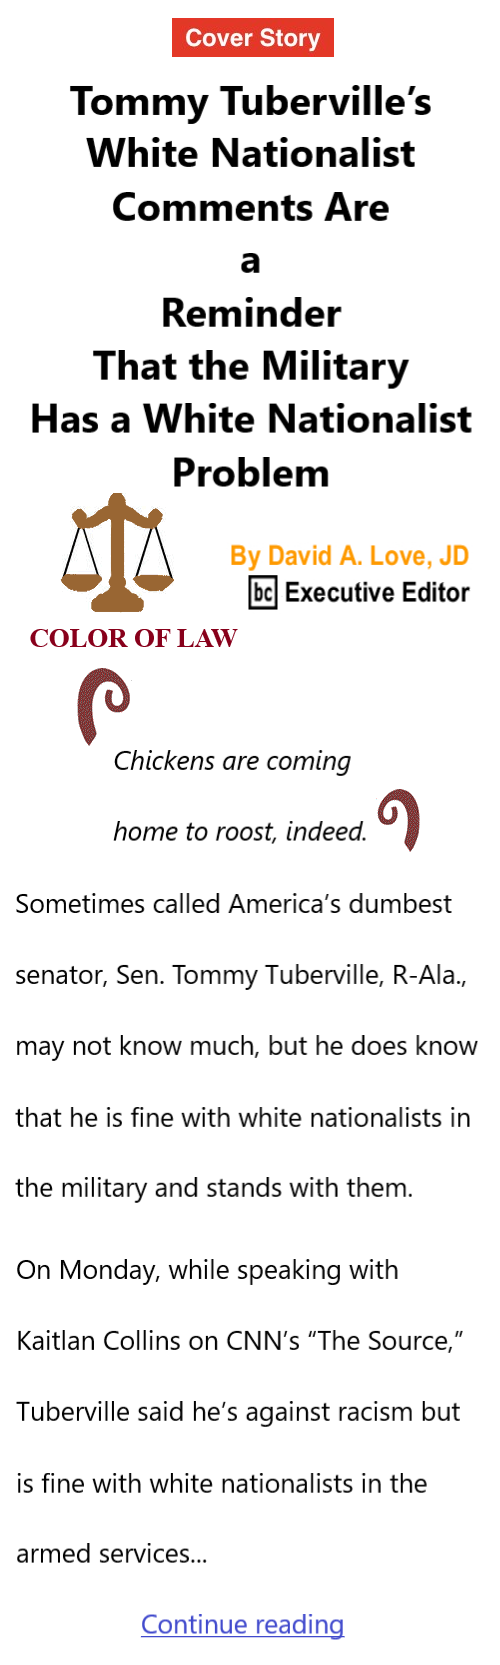 BlackCommentator.com July 27, 2023 - Issue 966: Cover Story - Tommy Tuberville’s White Nationalist Comments Are a Reminder That the Military Has a White Nationalist Problem - Color of Law By David A. Love, JD, BC Executive Editor